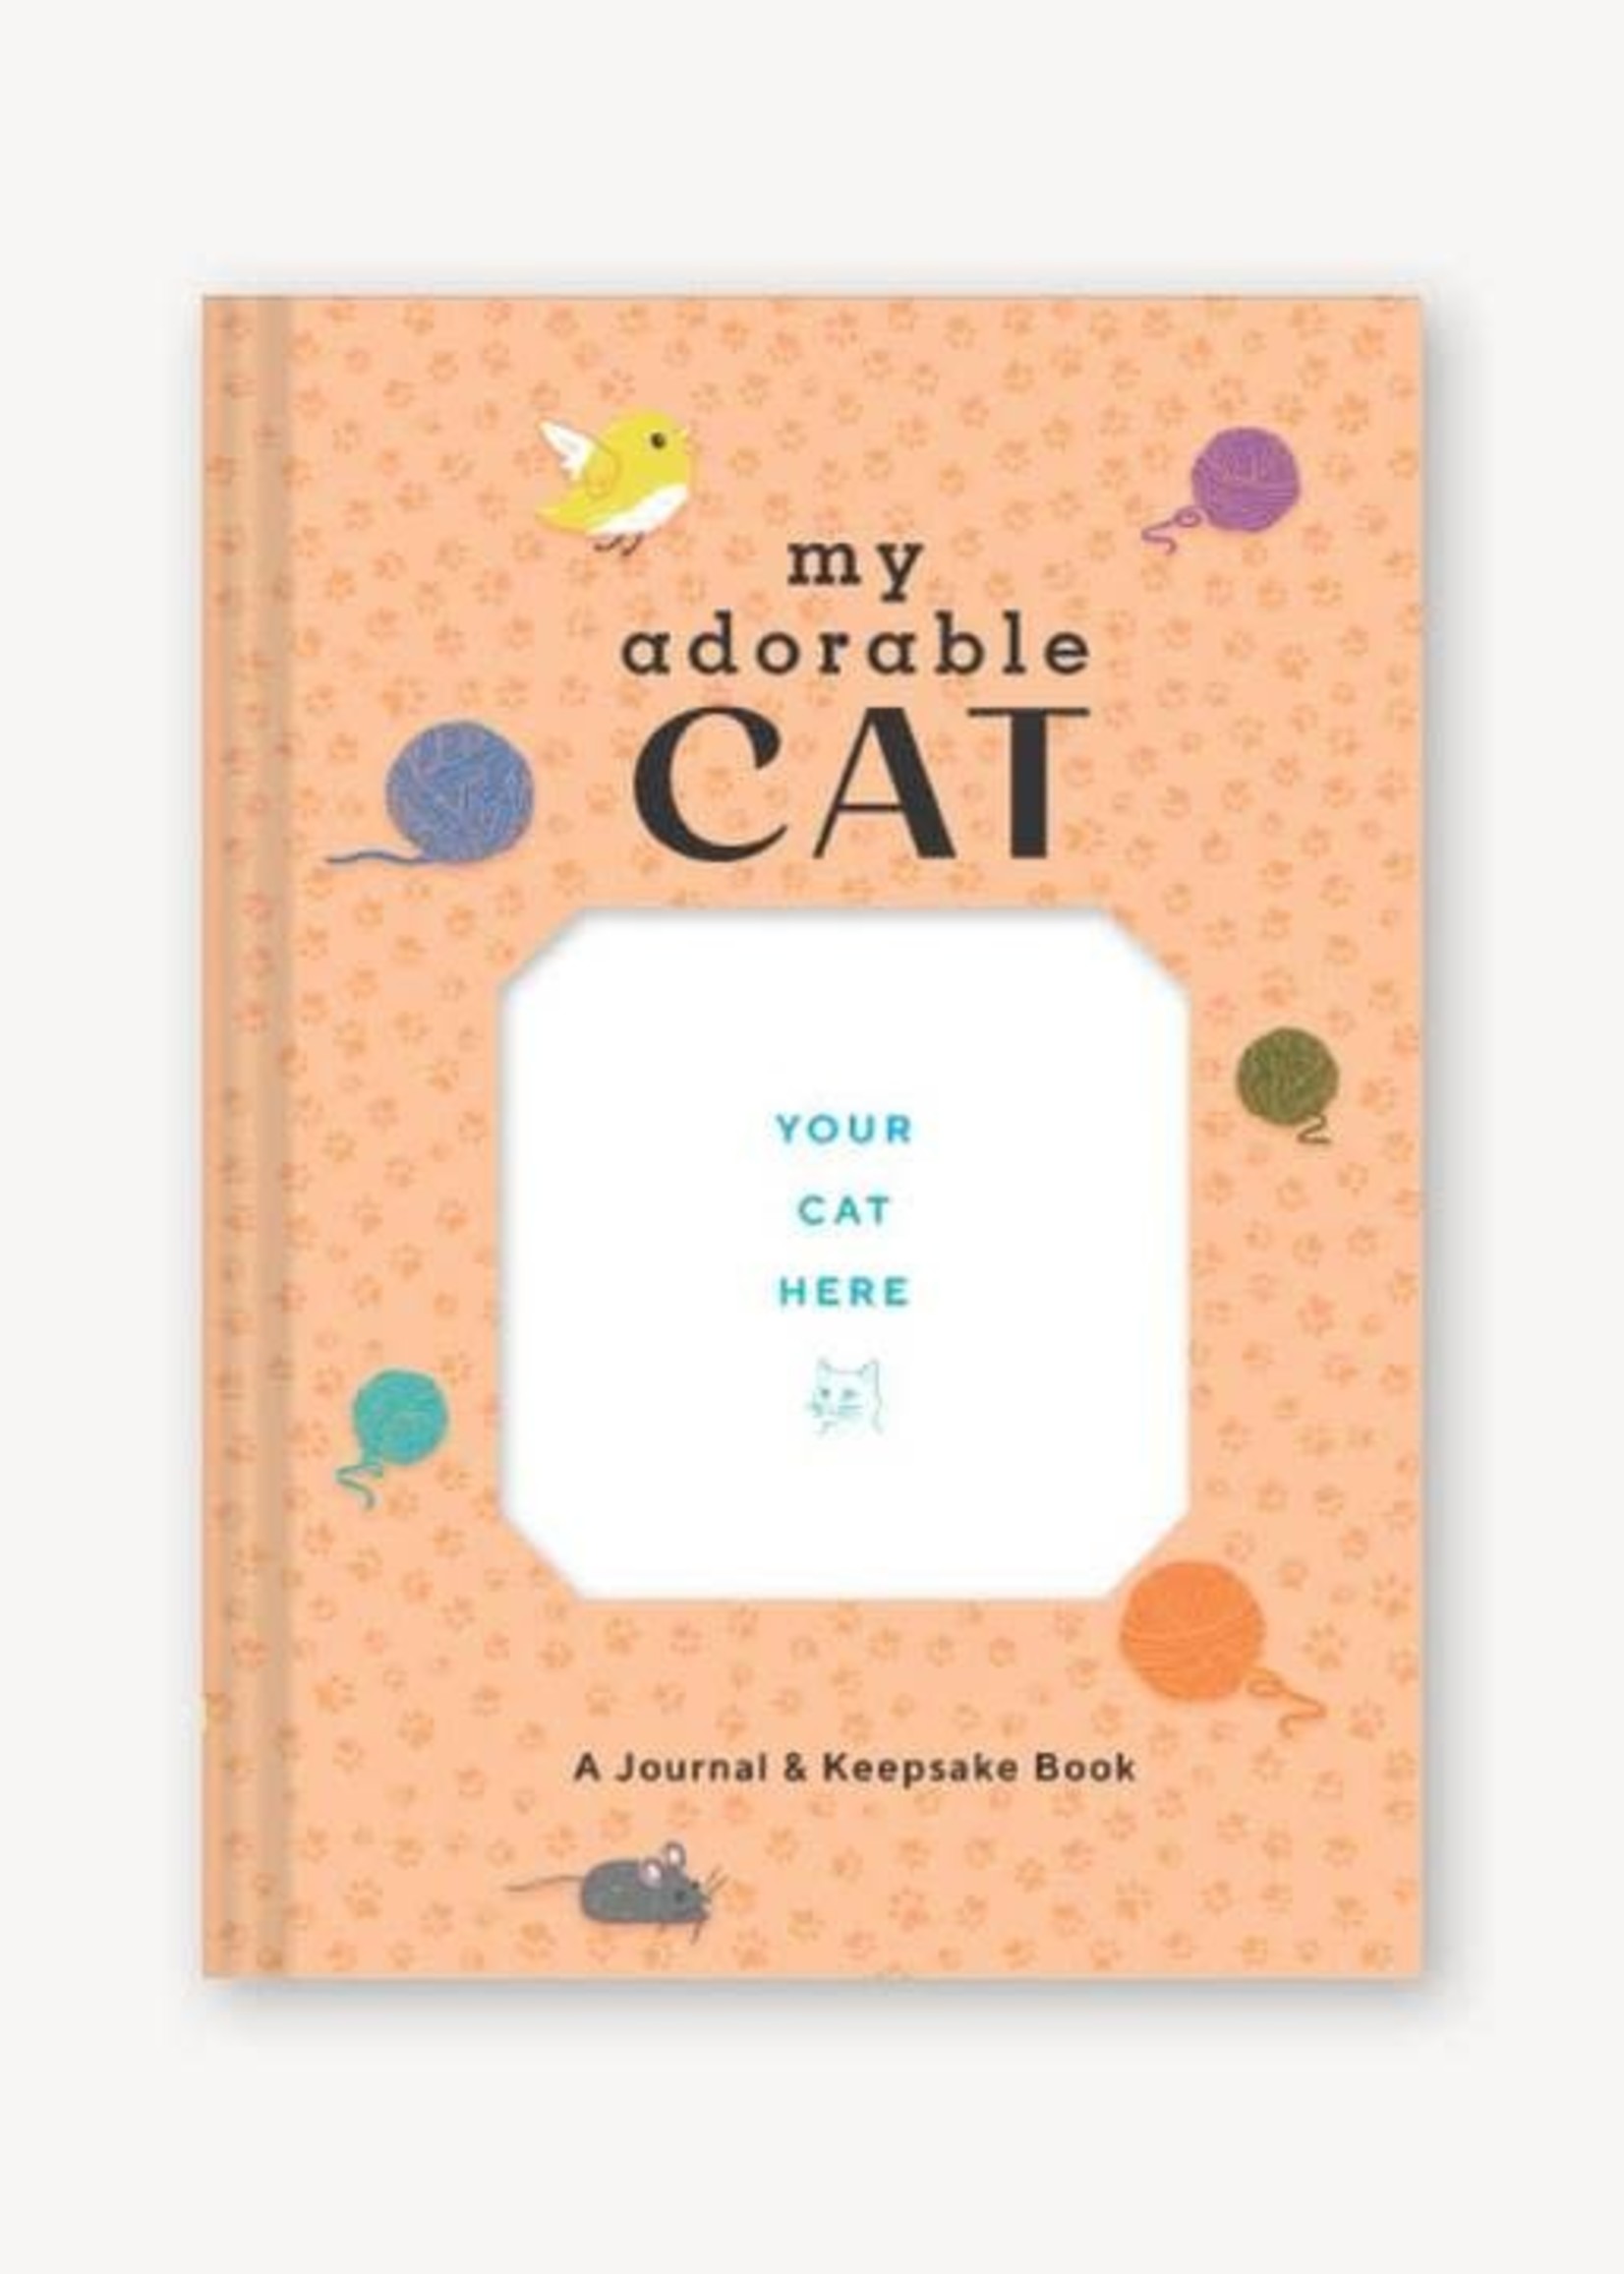 My Adorable Cat Journal from Chronicle Books